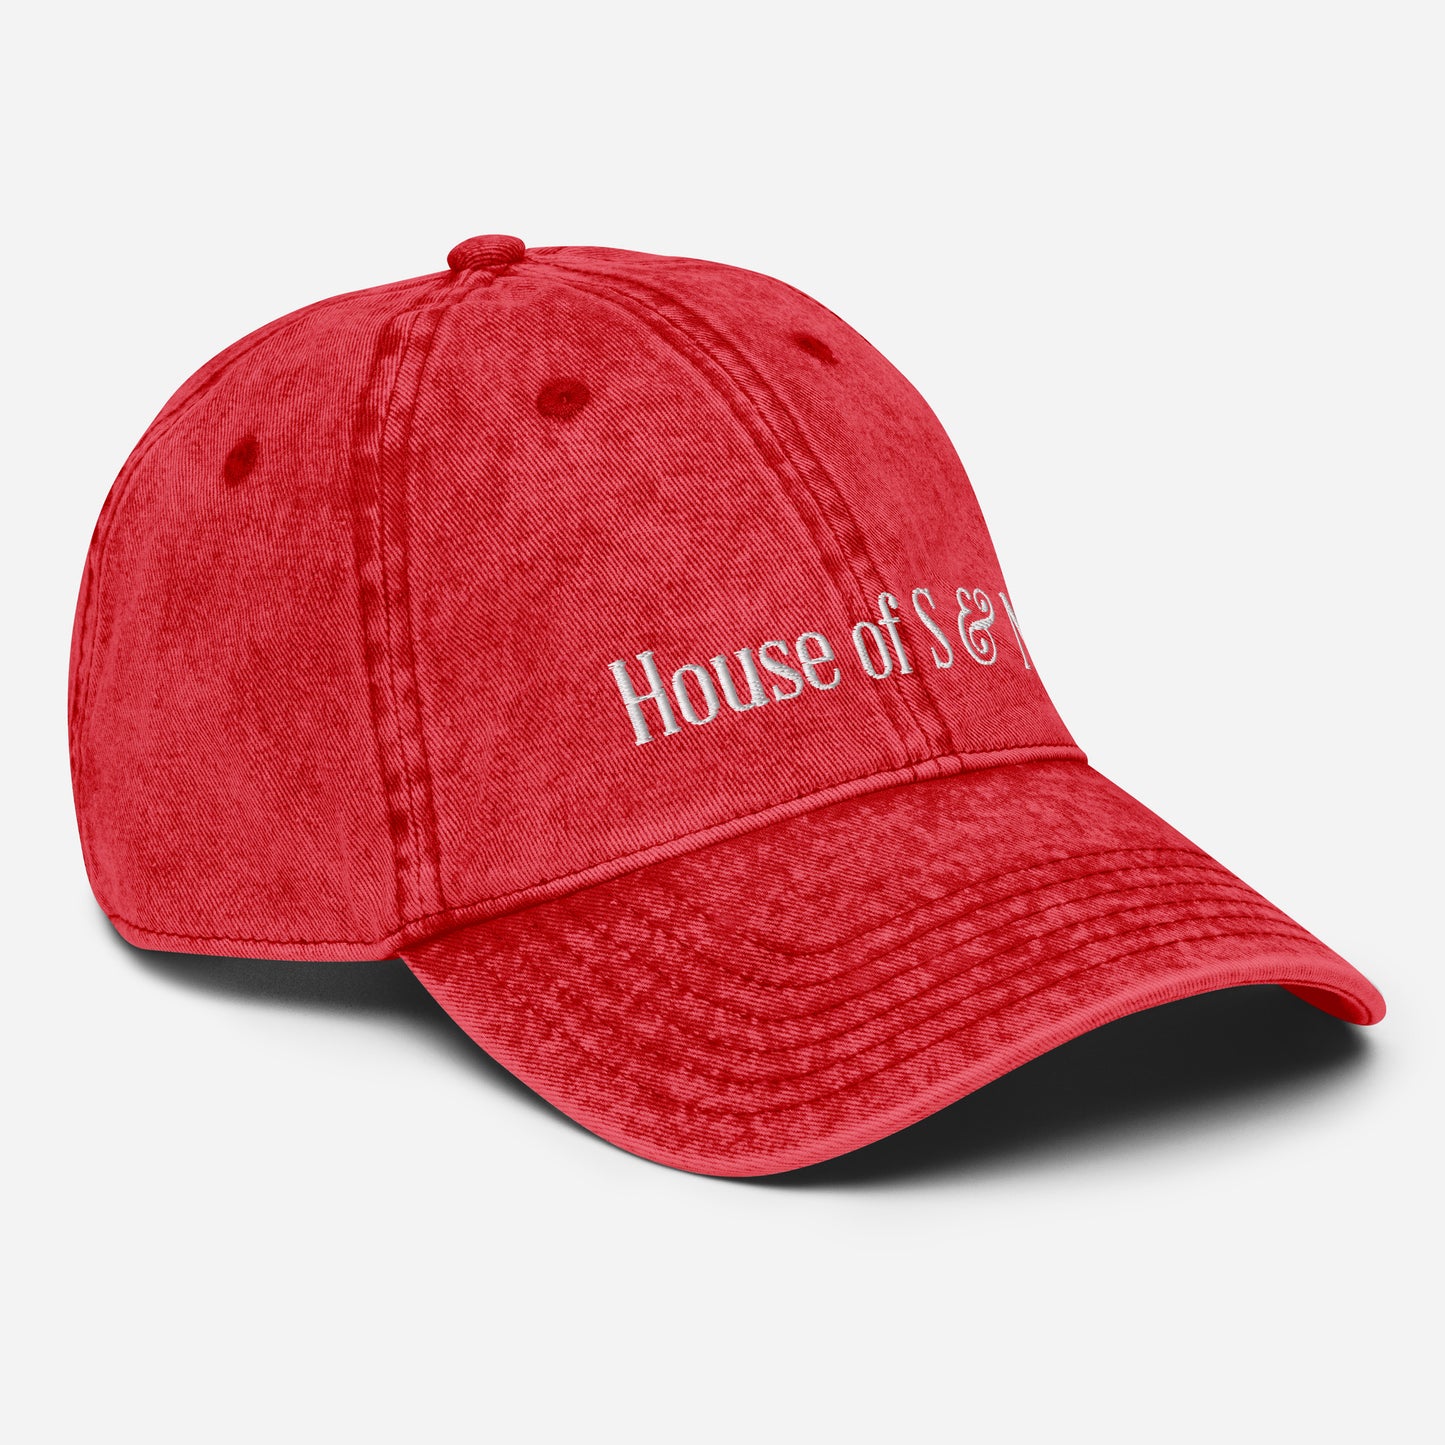 Vintage Cotton Twill Cap - House of S & N